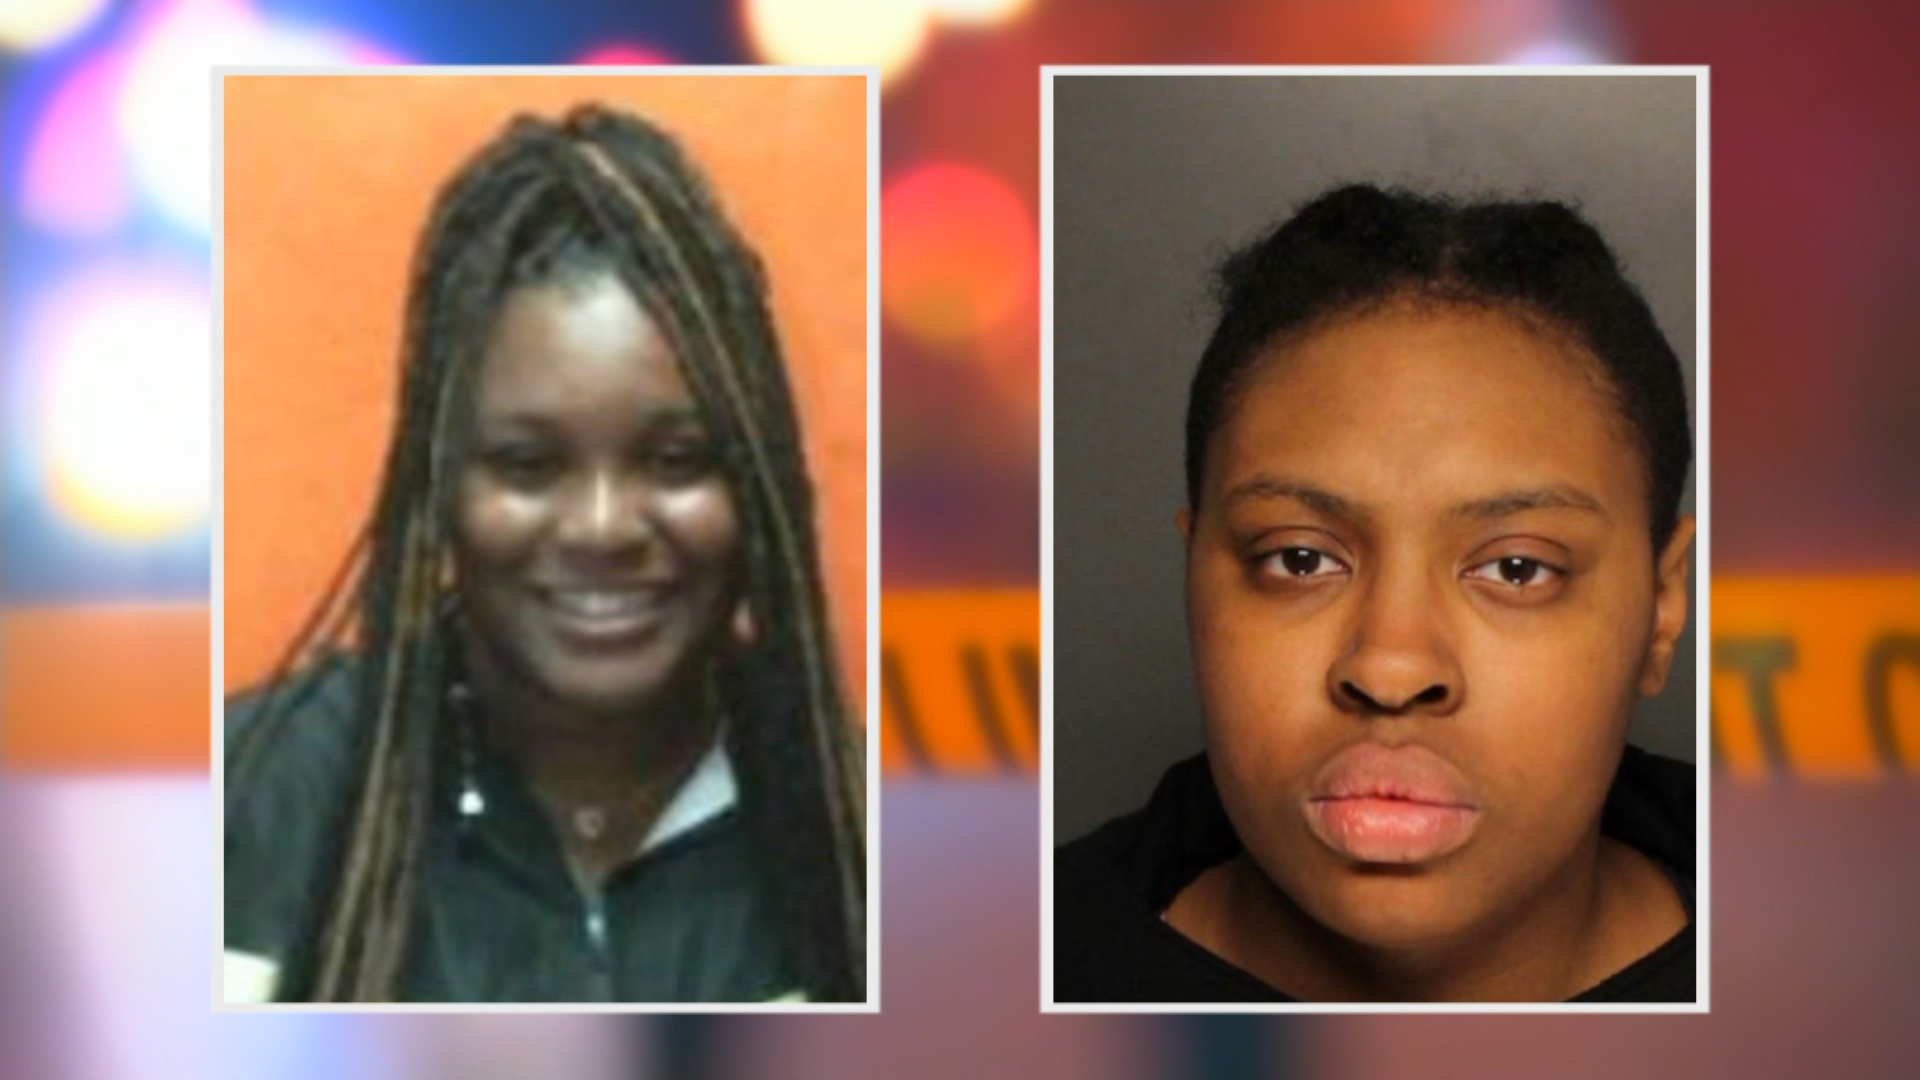 2 Teens Wanted For Pepper Spraying Carjacking Elderly Woman Arrested Philadelphia Police Say